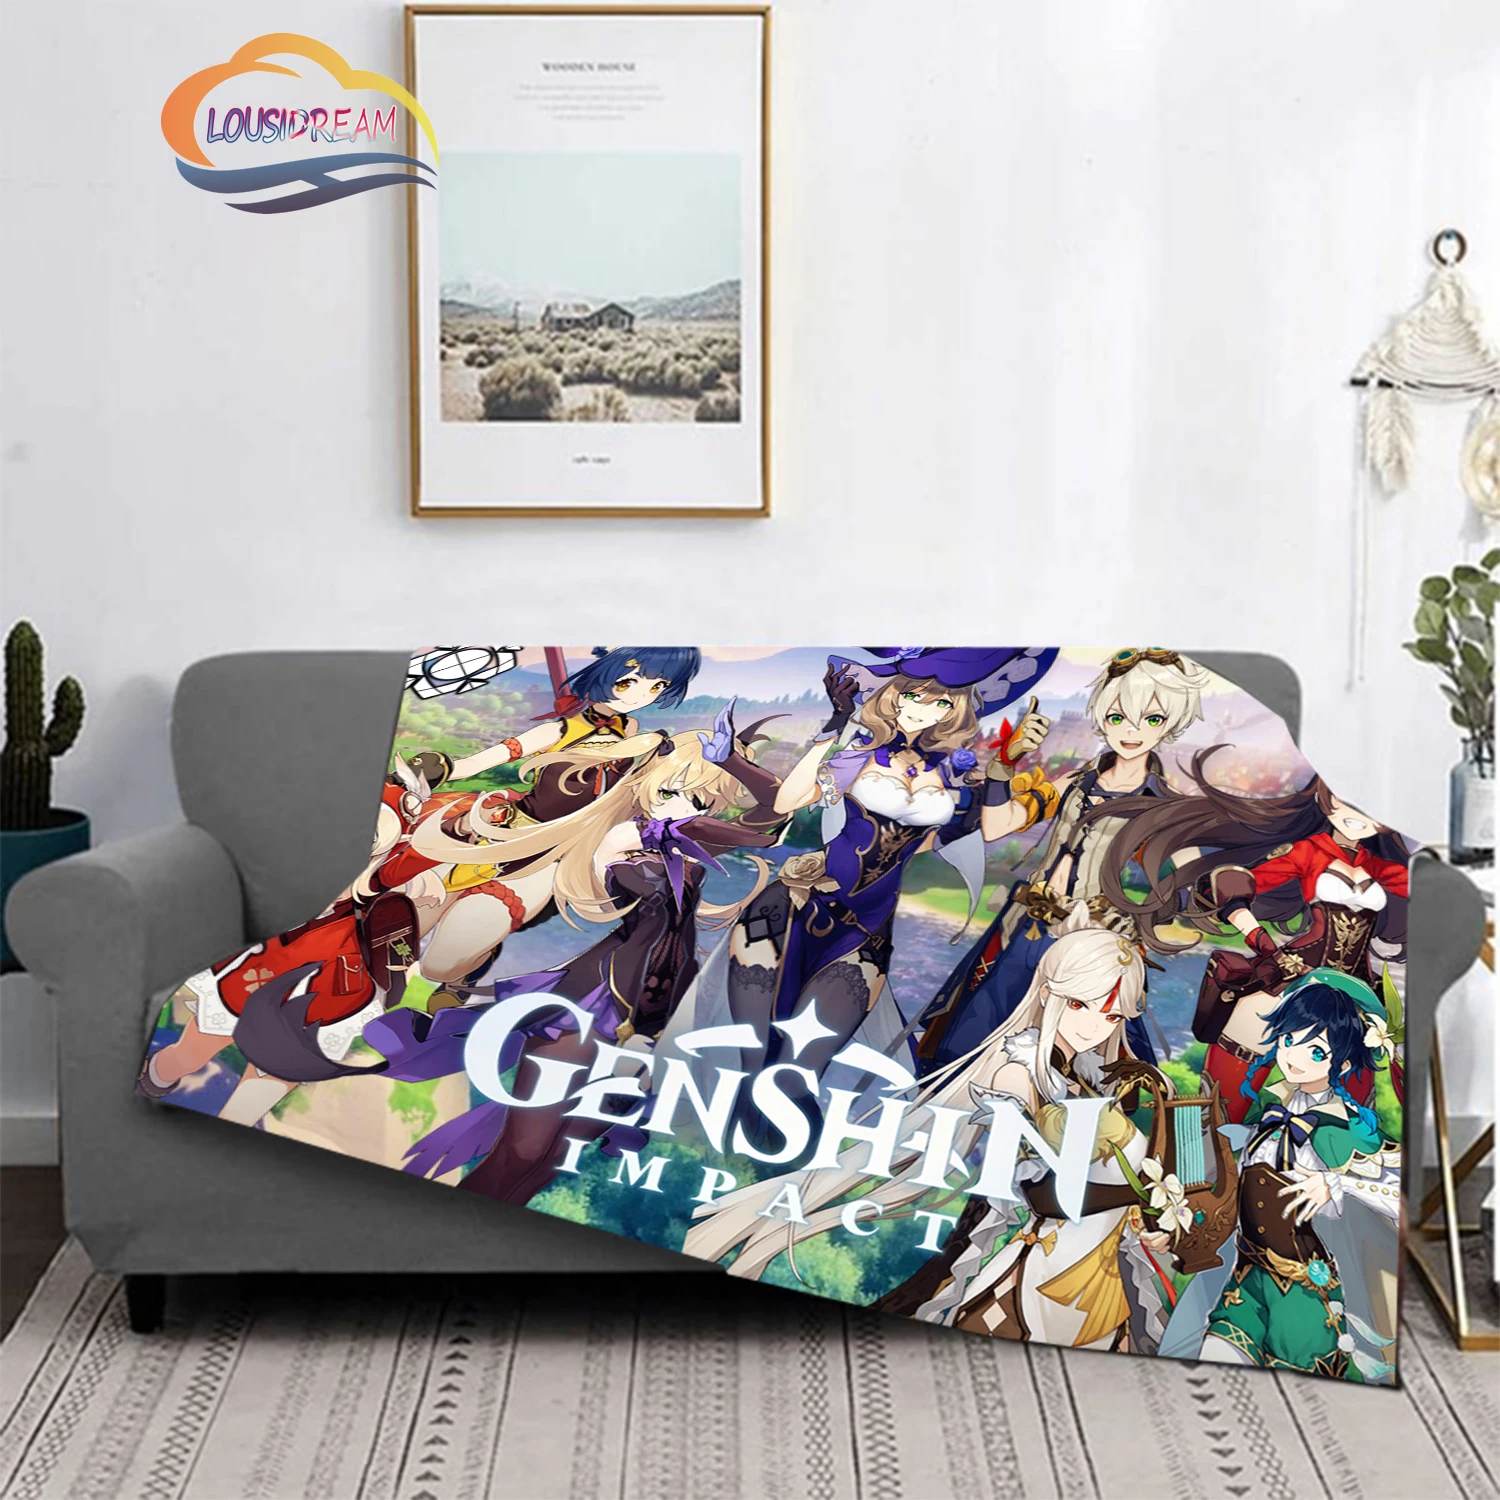 

Playroom Blanket Genshin Impact Game Characters Blanket 원신 Fashion Bed Thin Quilt Home Office Washable Flannel warm Blanket